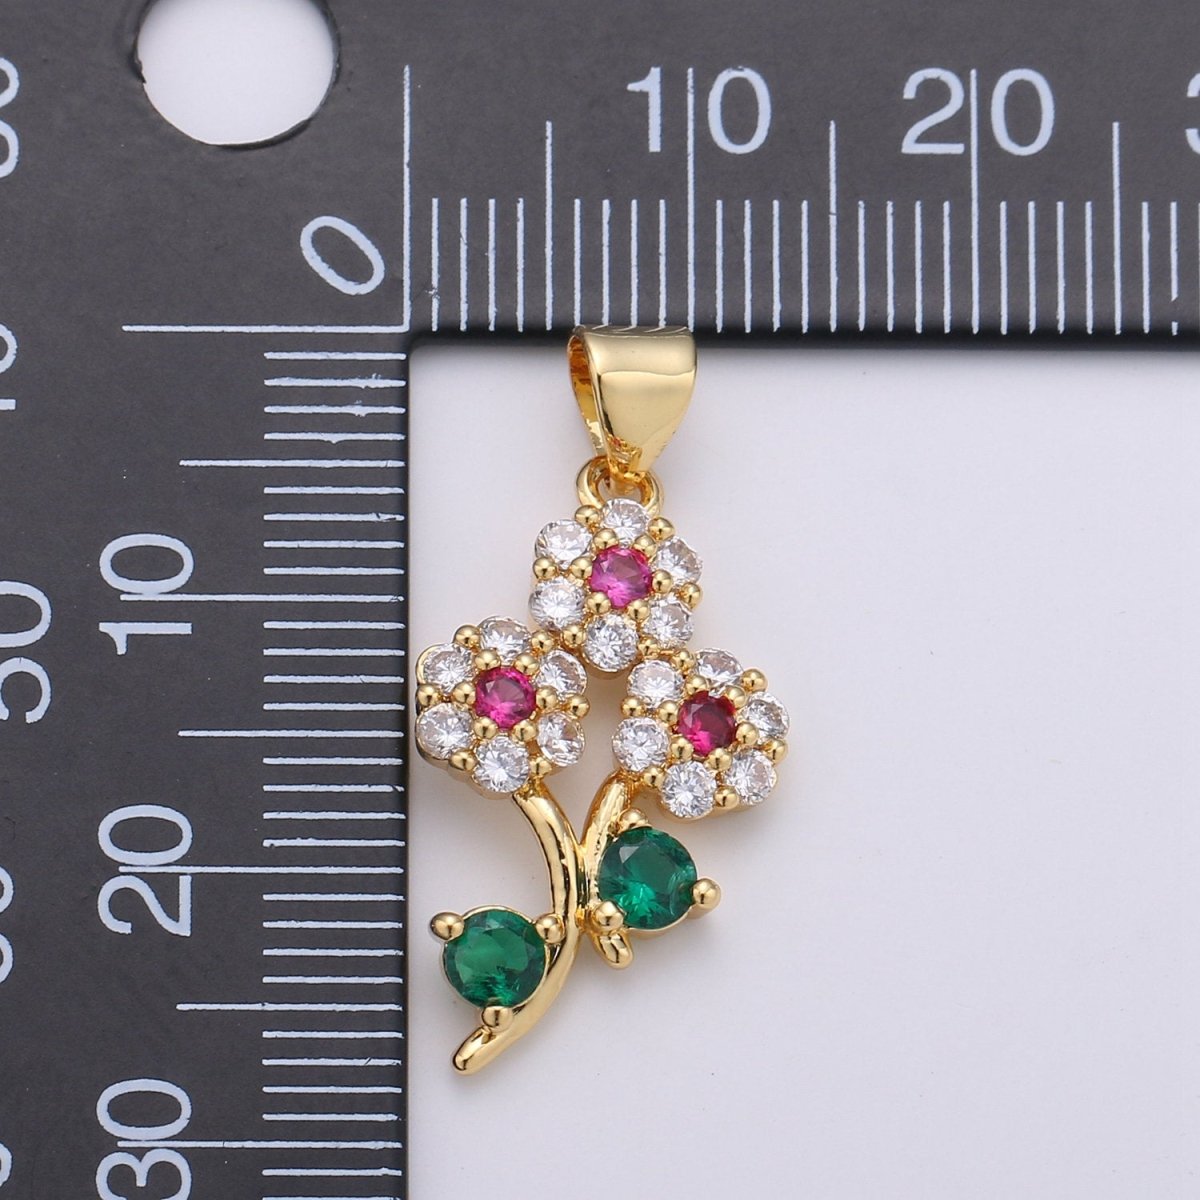 24K Gold Filled Micro Pave Flower Charm, Silver Small Cubic Flower Charm Multi Color Pendant for necklace earring bracelet Component I-601 I-602 - DLUXCA